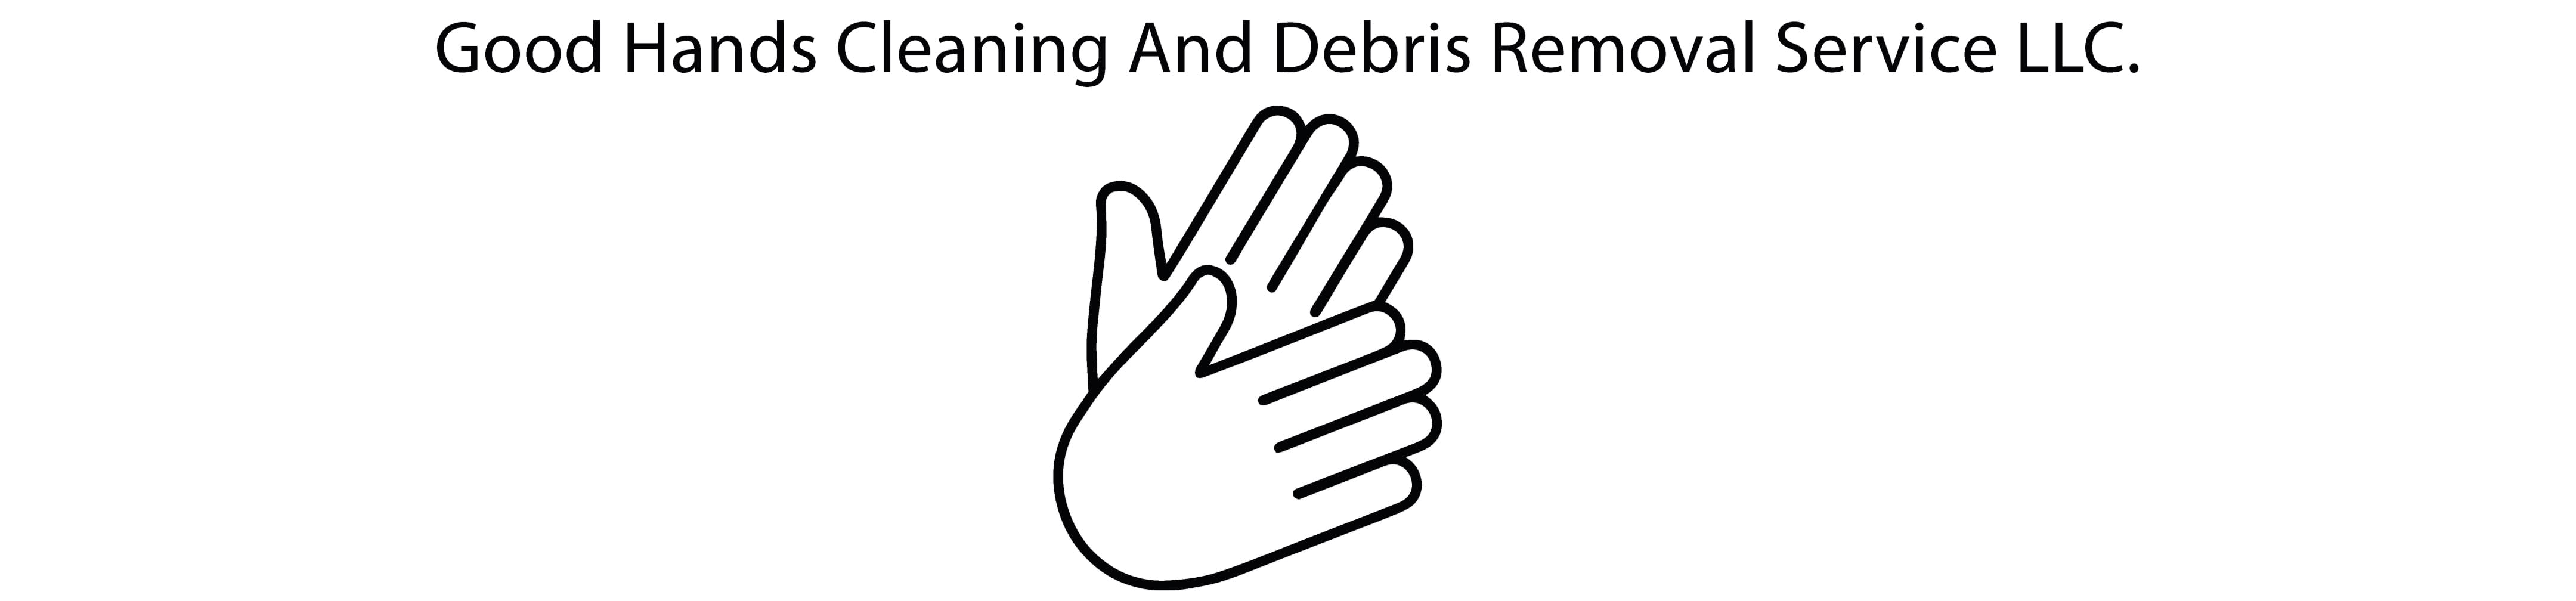 Good Hands Cleaning and Debris Removal Service